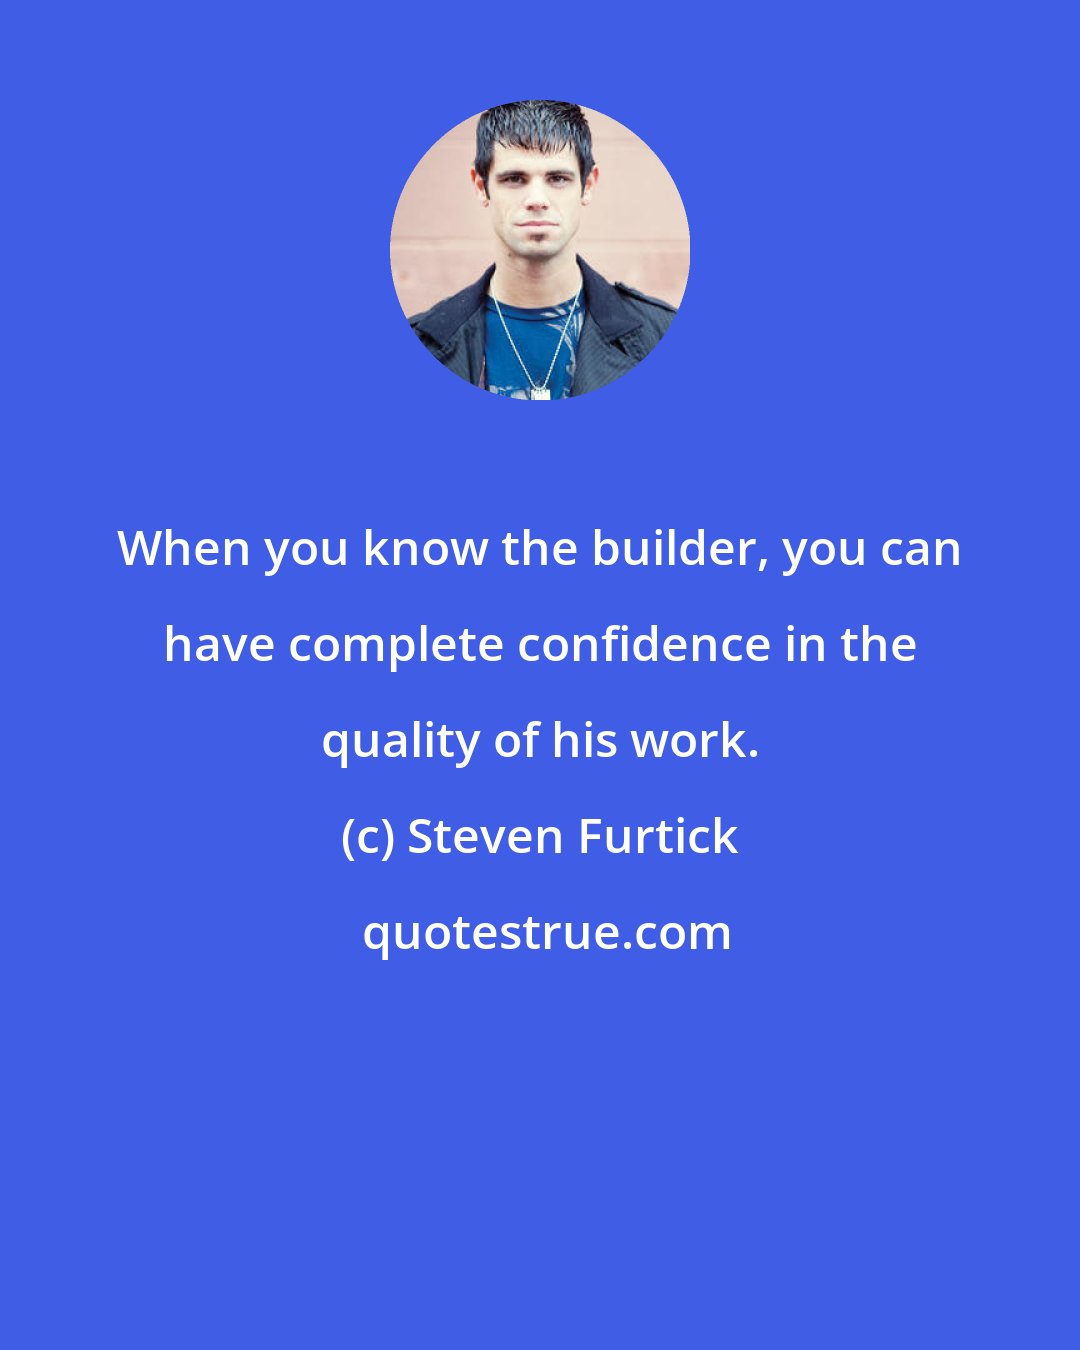 Steven Furtick: When you know the builder, you can have complete confidence in the quality of his work.